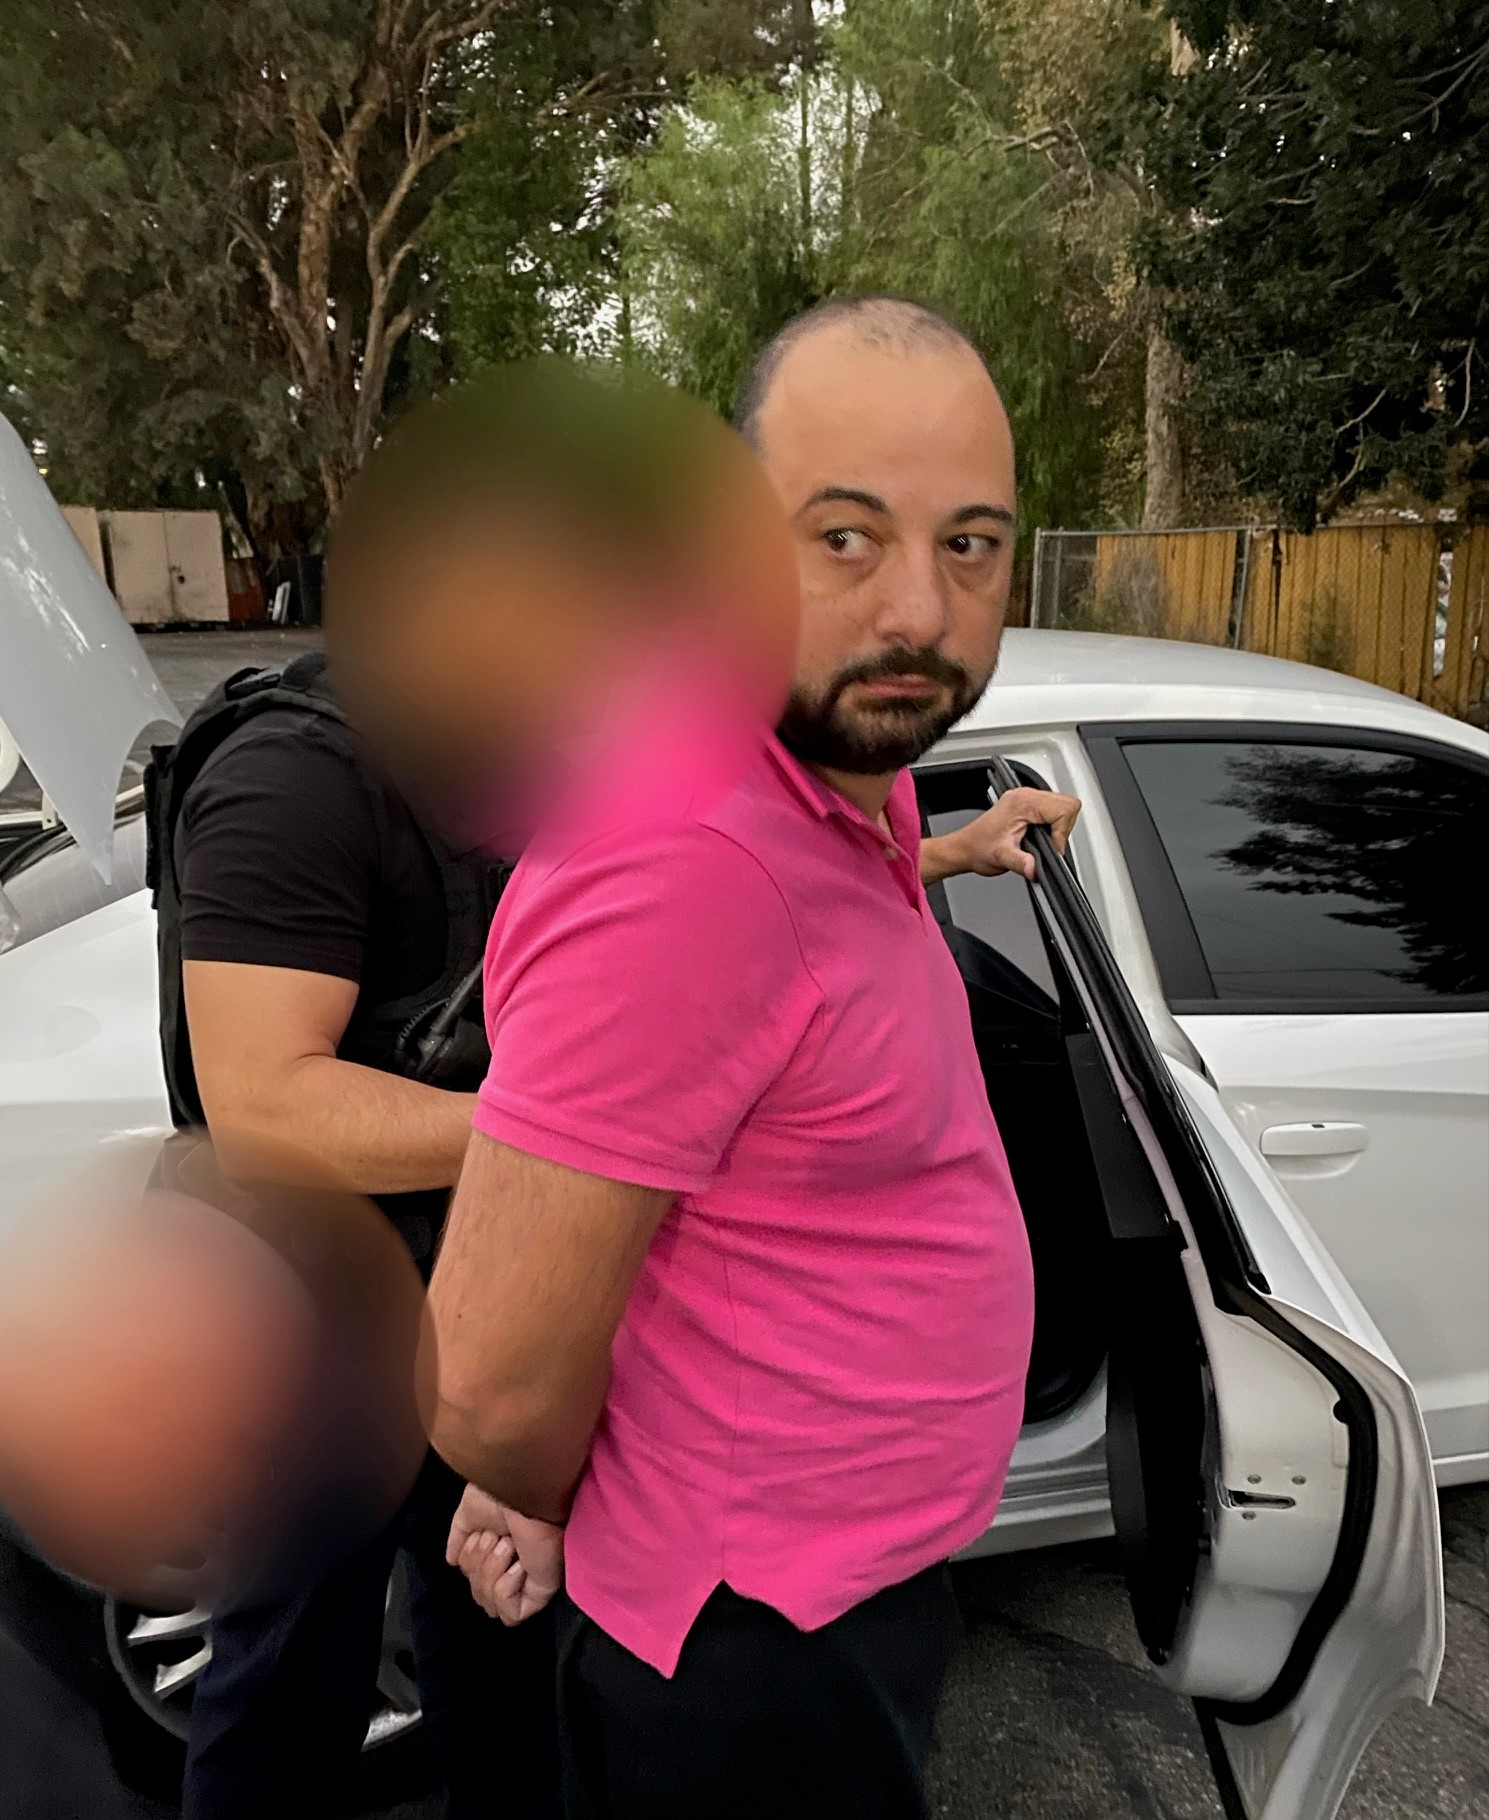 ERO Los Angeles Foreign Fugitive Officers apprehended Dorel Radu, wanted in Romania for attempted homicide, during a targeted enforcement operation.